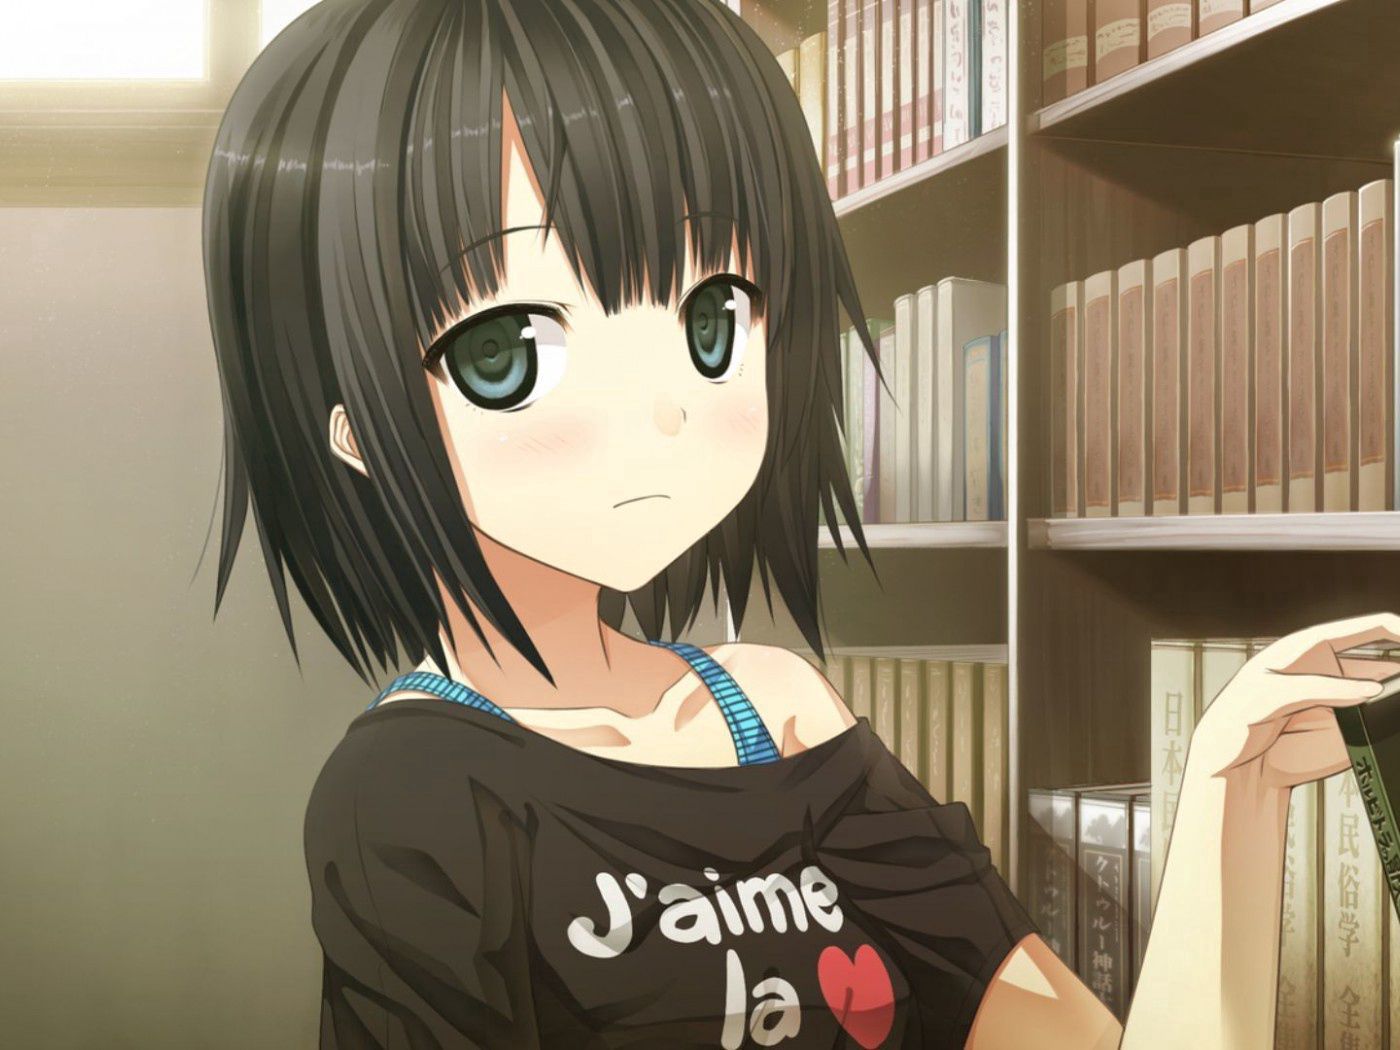 Download wallpaper 1400x1050 girl, anime, books, library standard 4:3 HD background